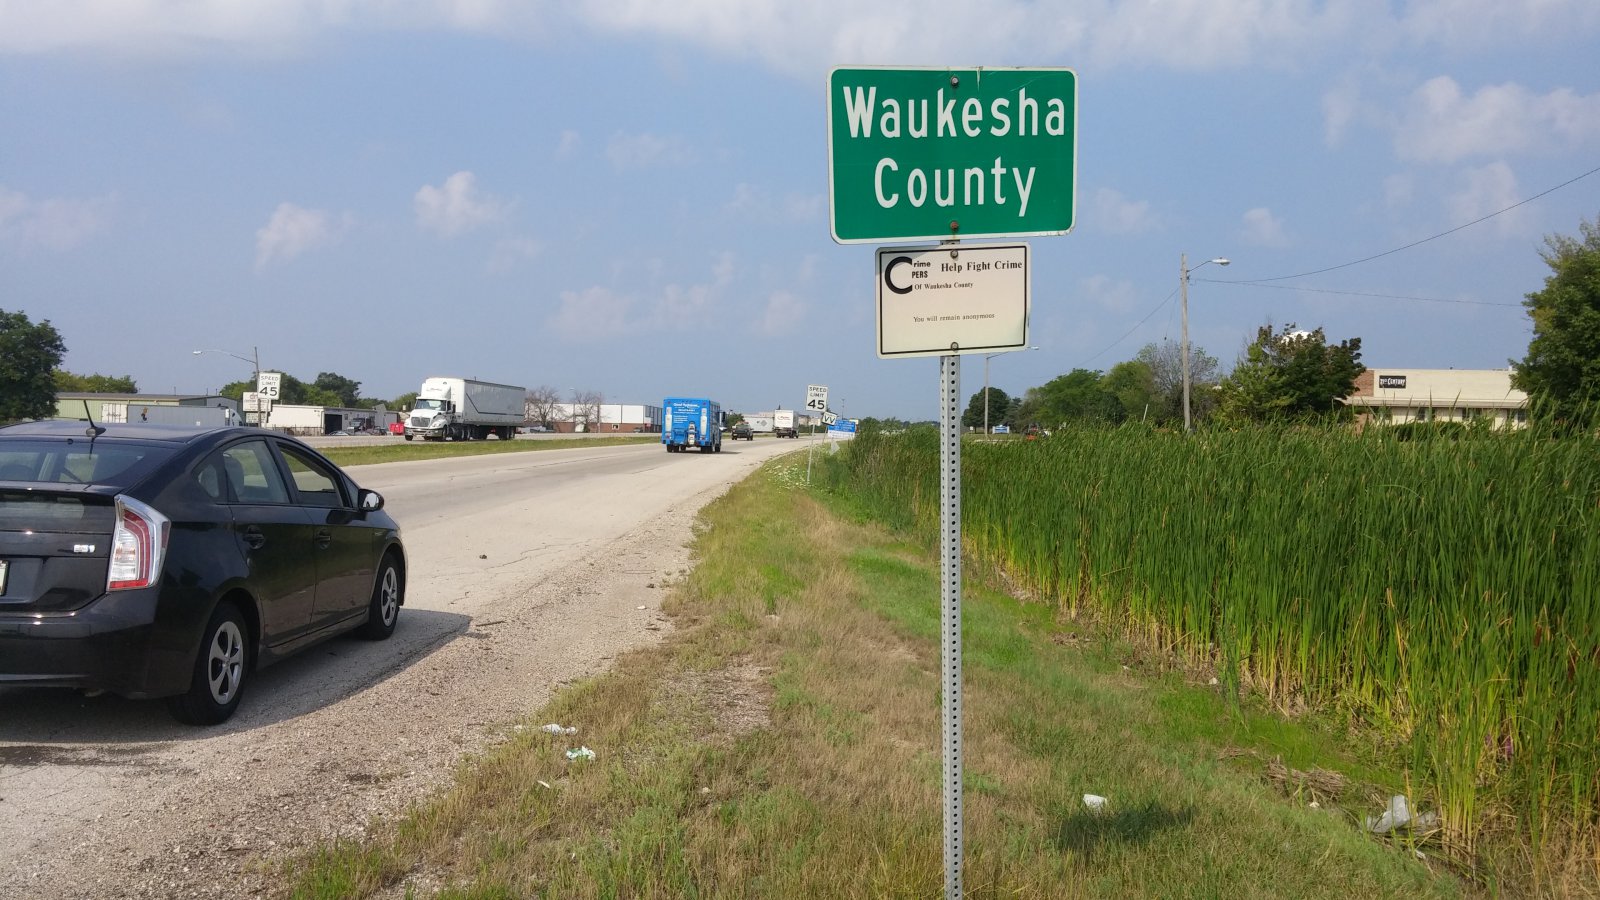 Silver Spring enters Waukesha County. Photo by Carl Baehr.